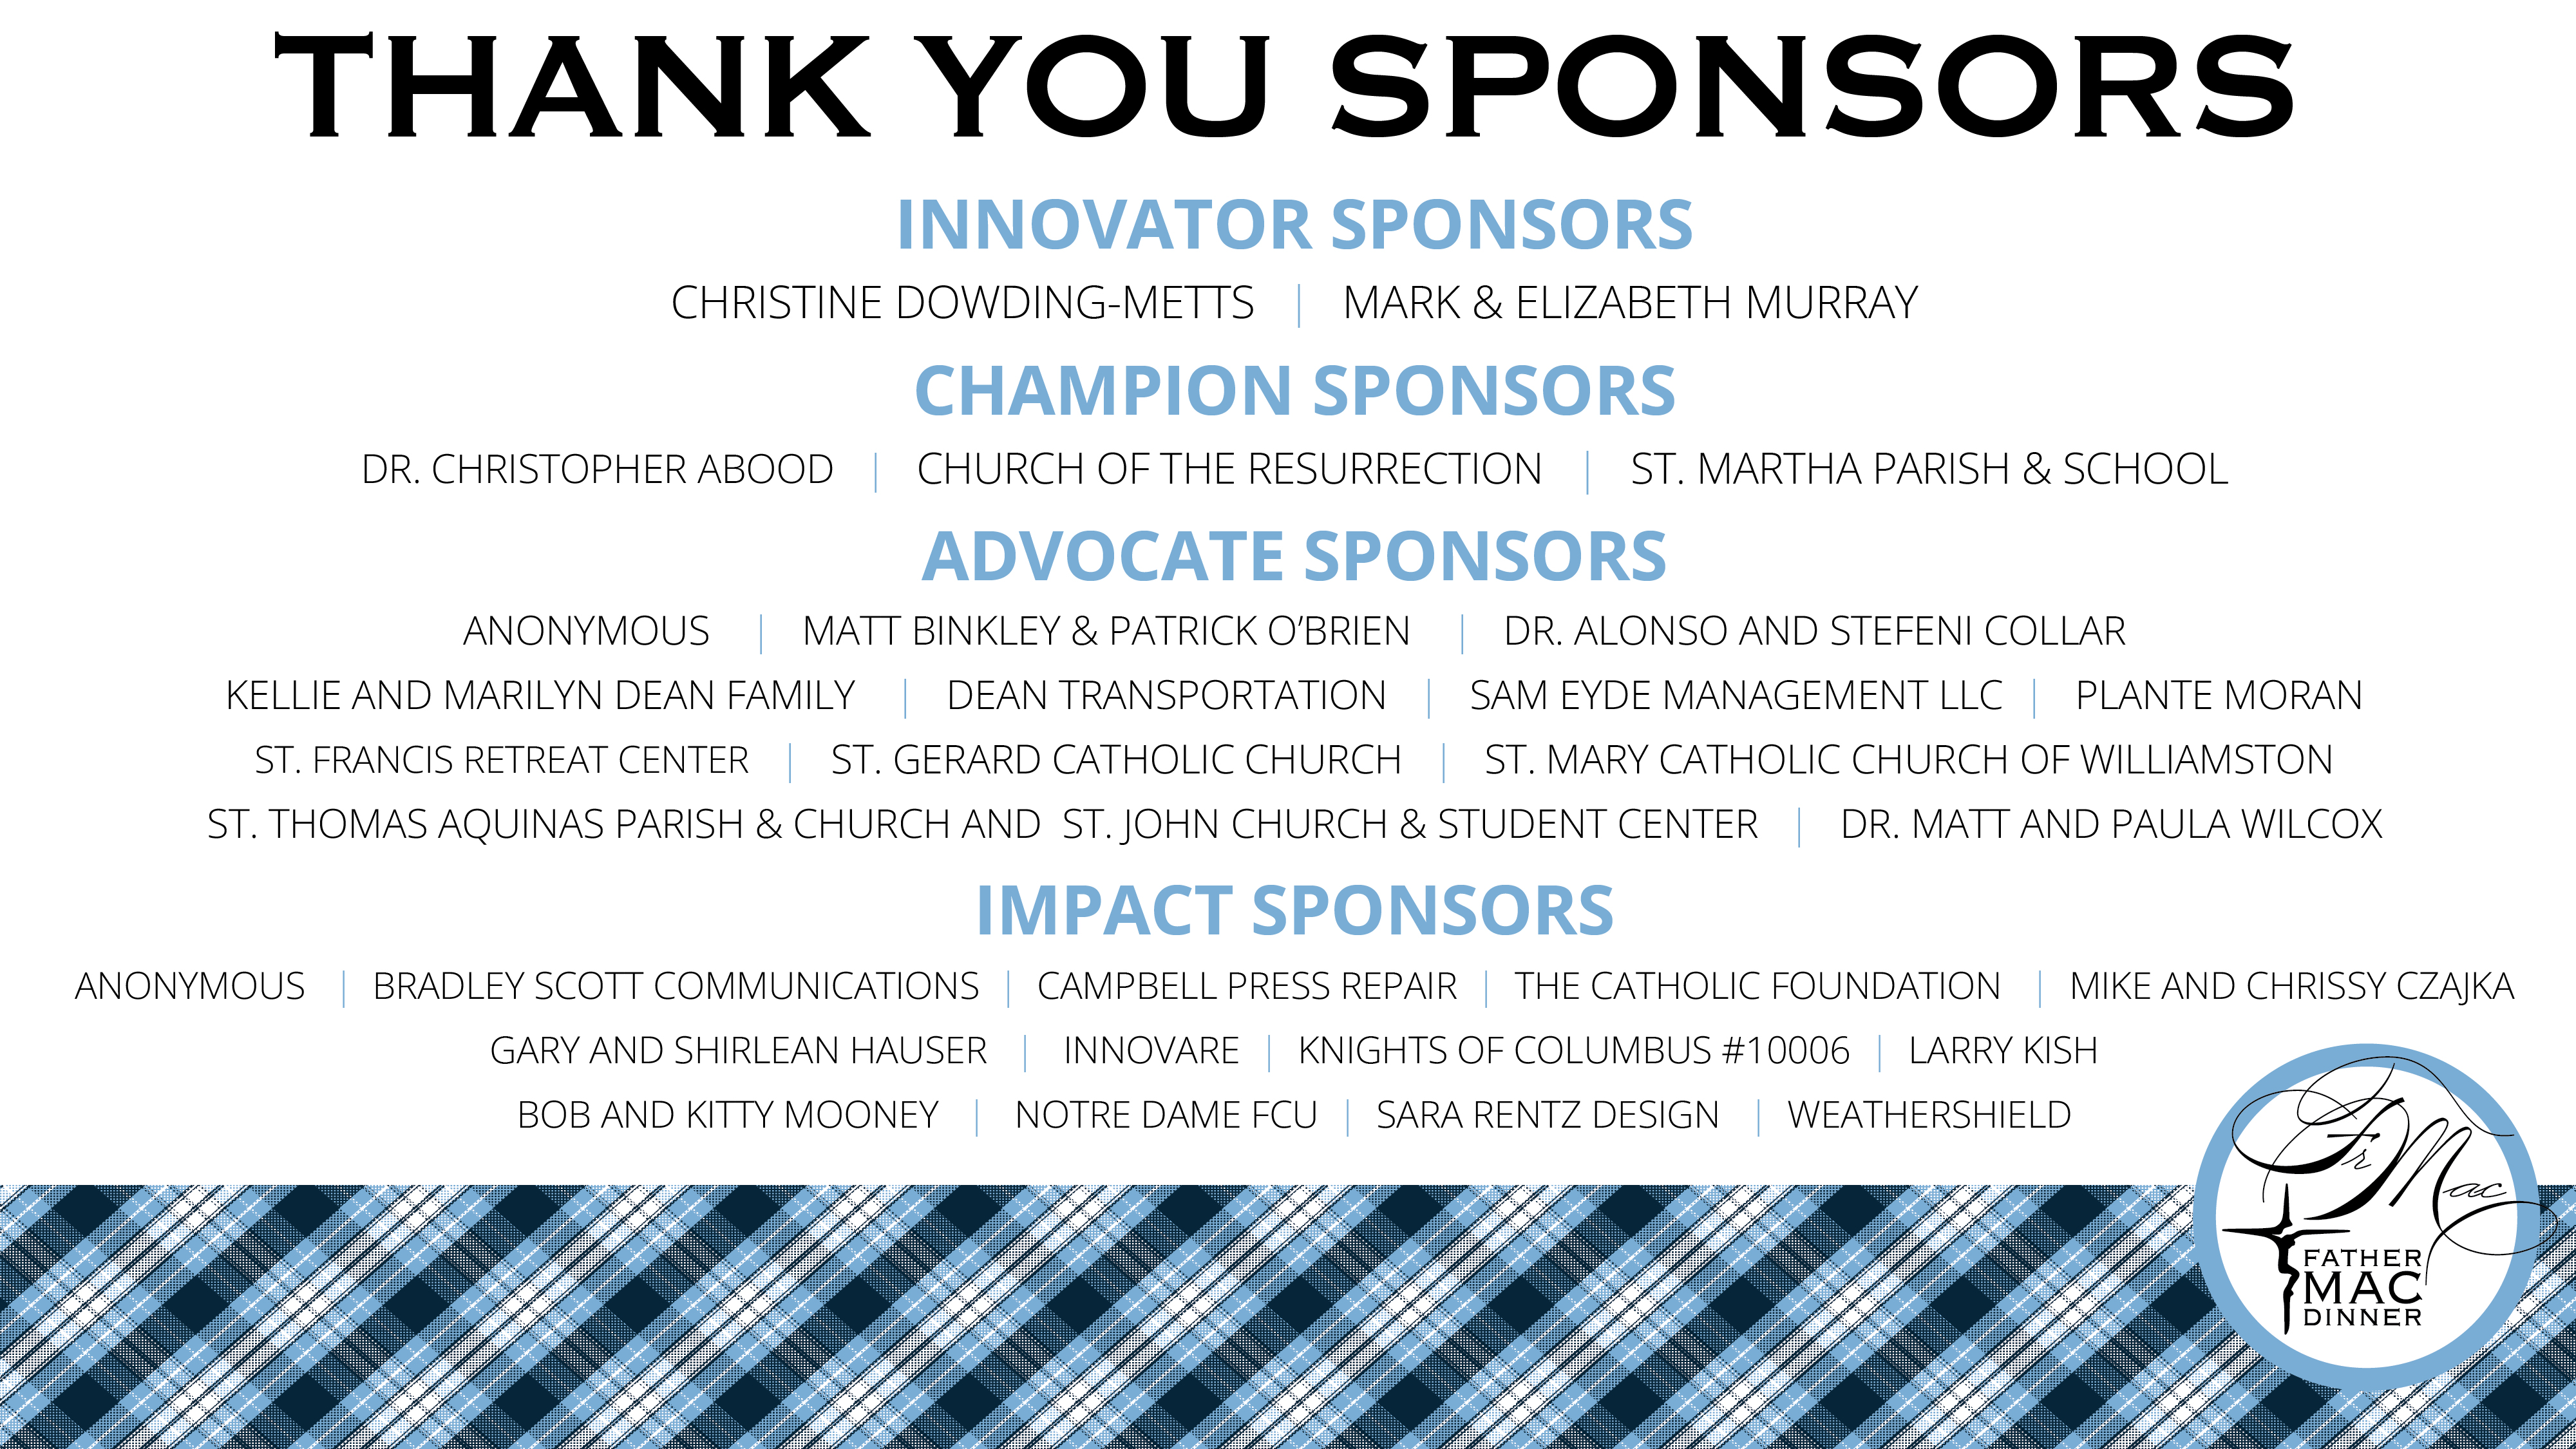 Thank you to our amazing and generous sponsors